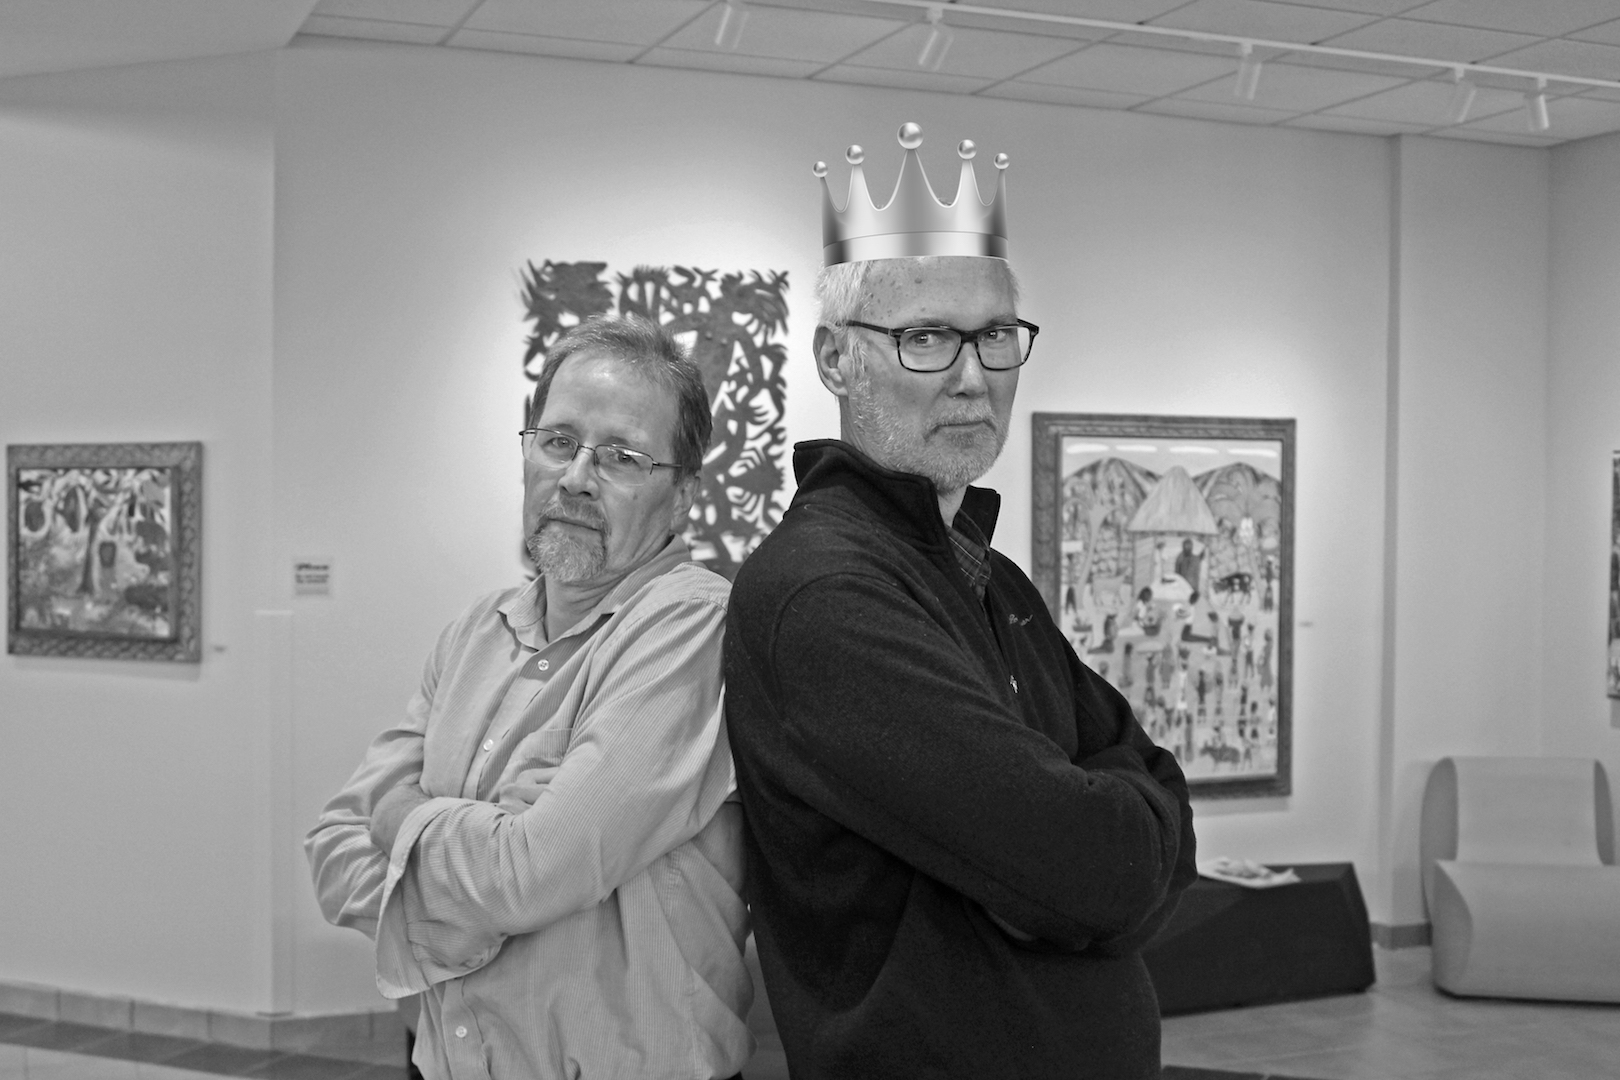 Keith Graber Miller wears a crown and poses back to back with John Roth